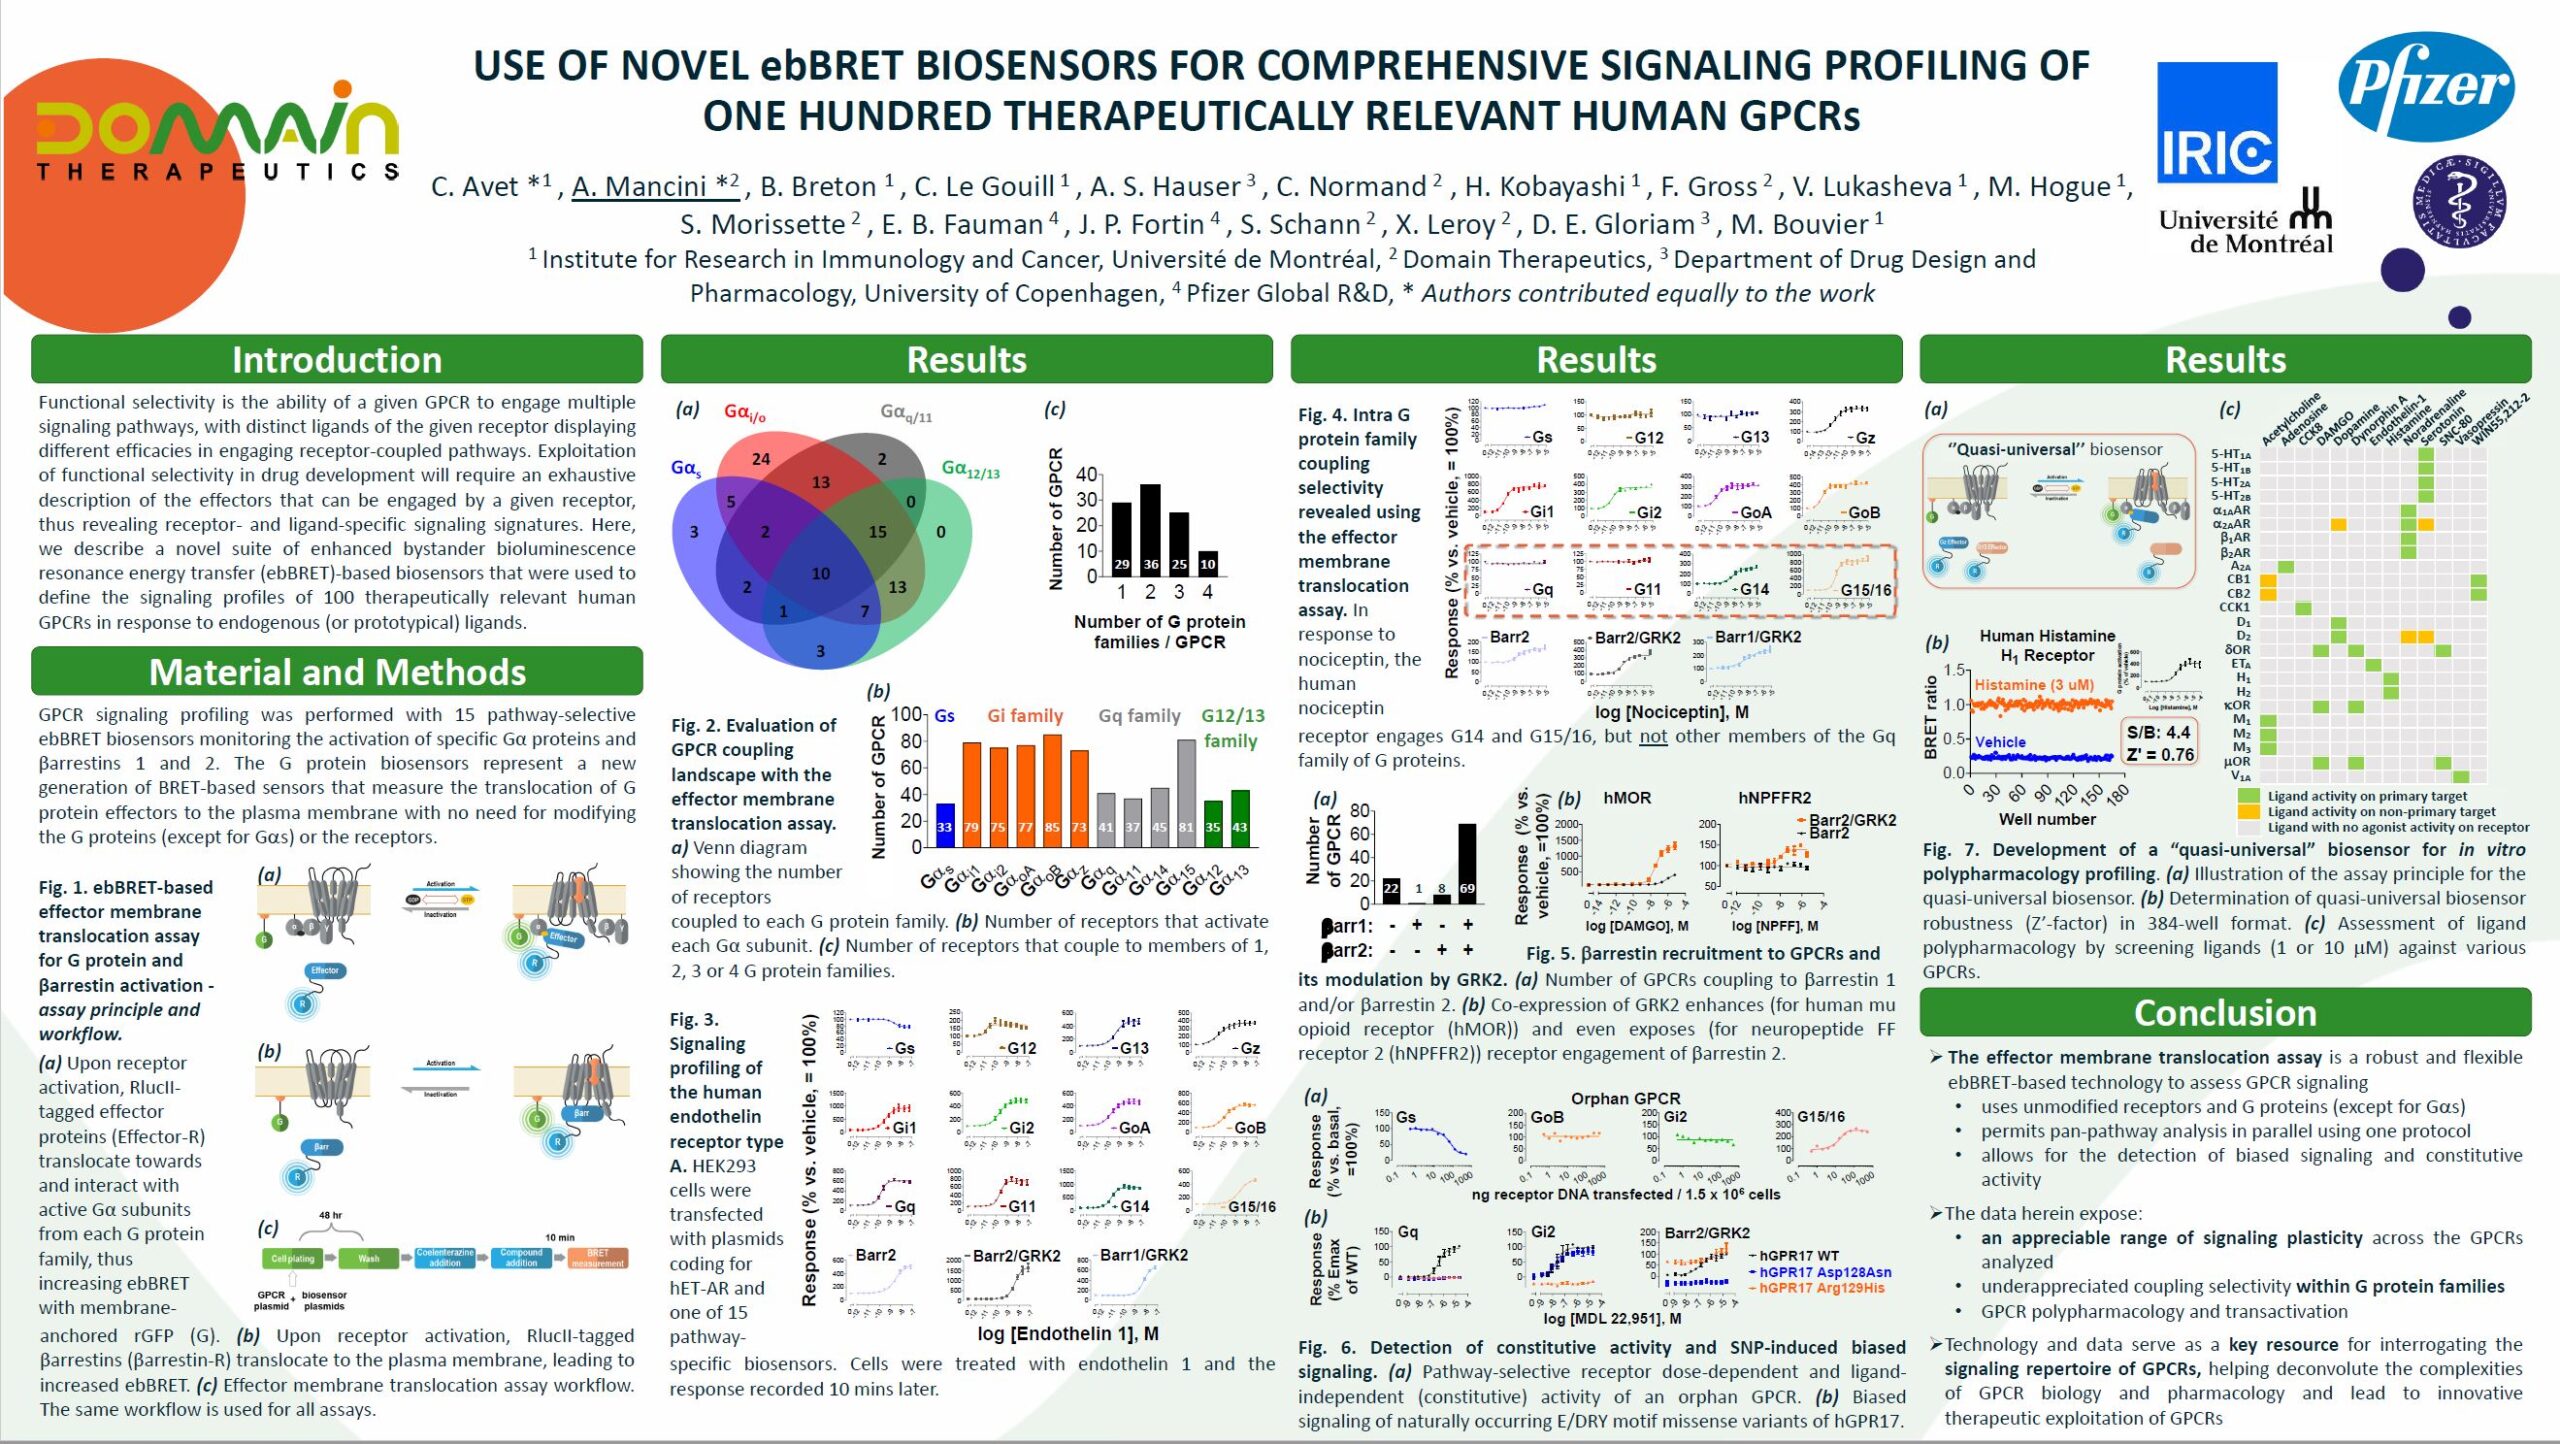 ASPET 2021: Use of novel ebBRET biosensors for comprehensive signaling profiling of one hundred therapeutically relevant human GPCRs